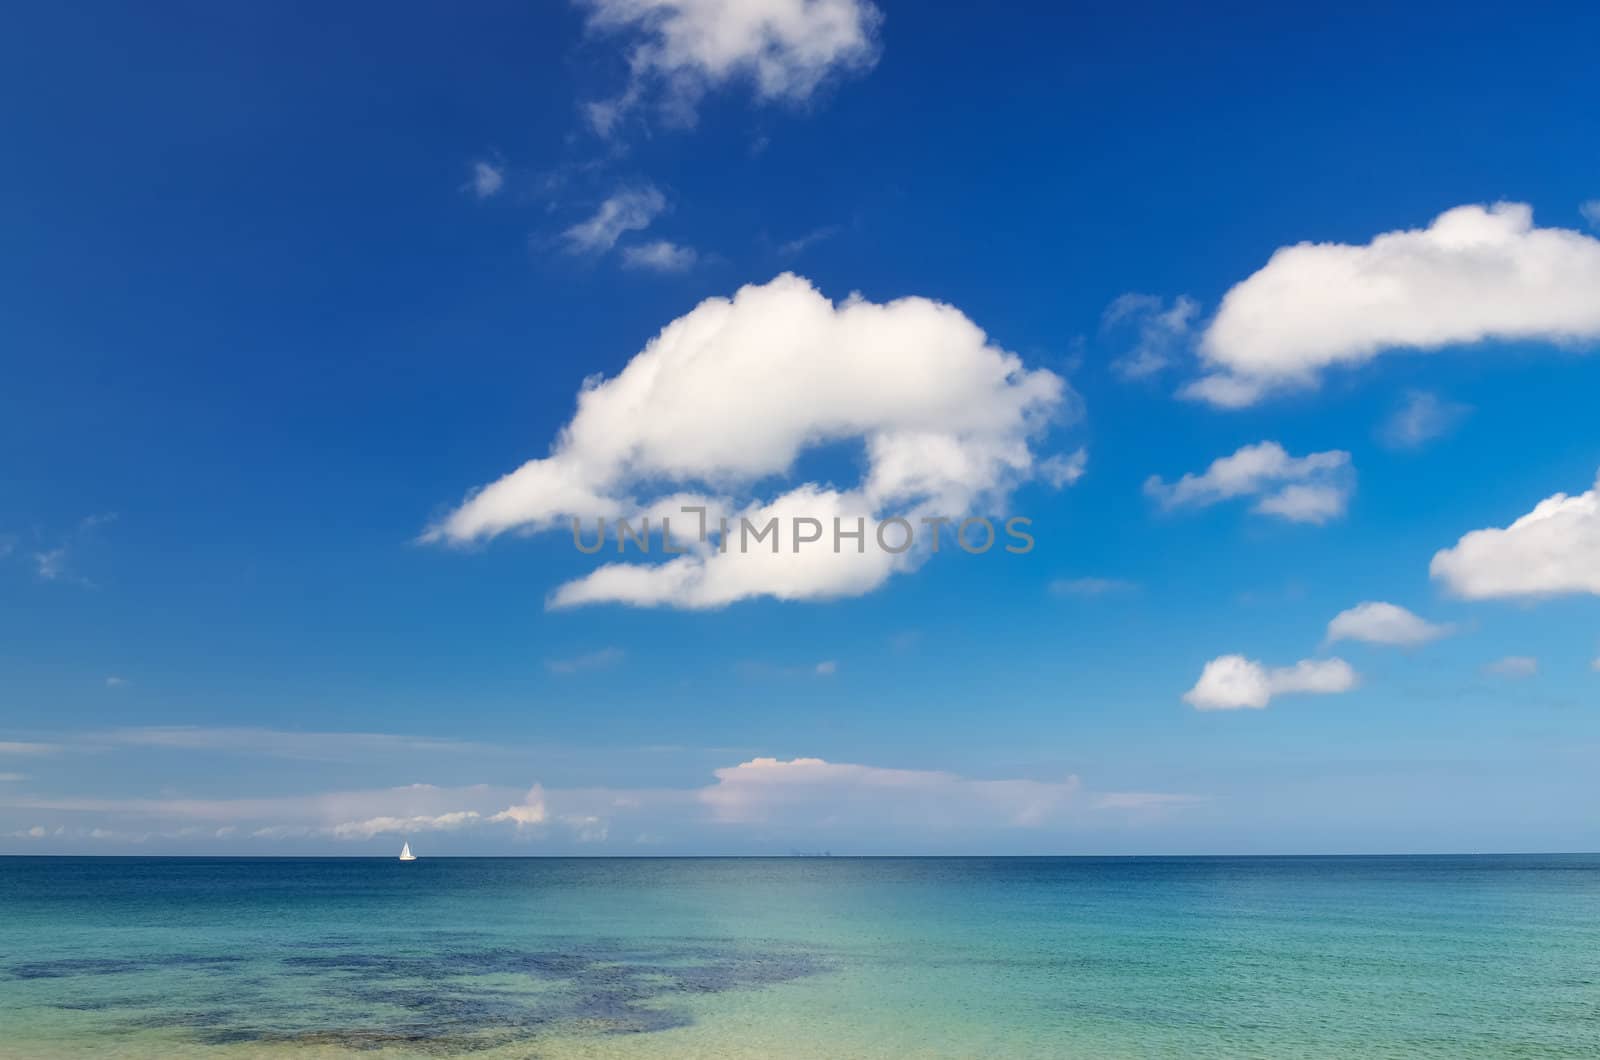 Ocean day landscape with blue cloudy sky and little sailboat